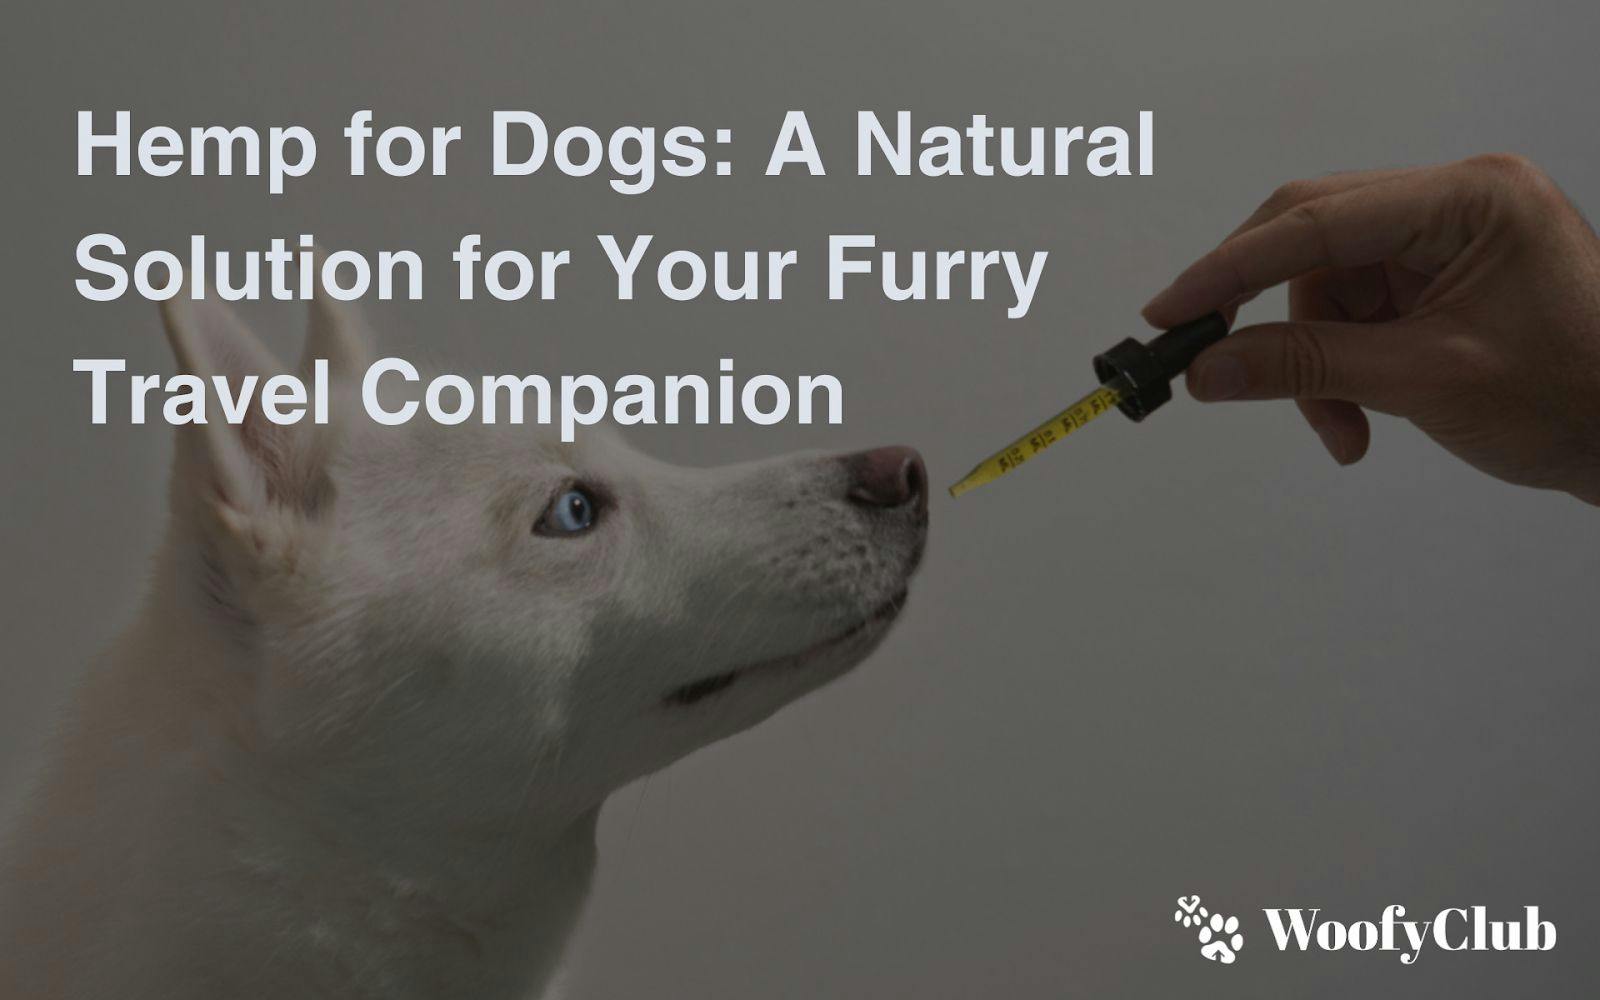 Hemp For Dogs: A Natural Solution For Your Furry Travel Companion